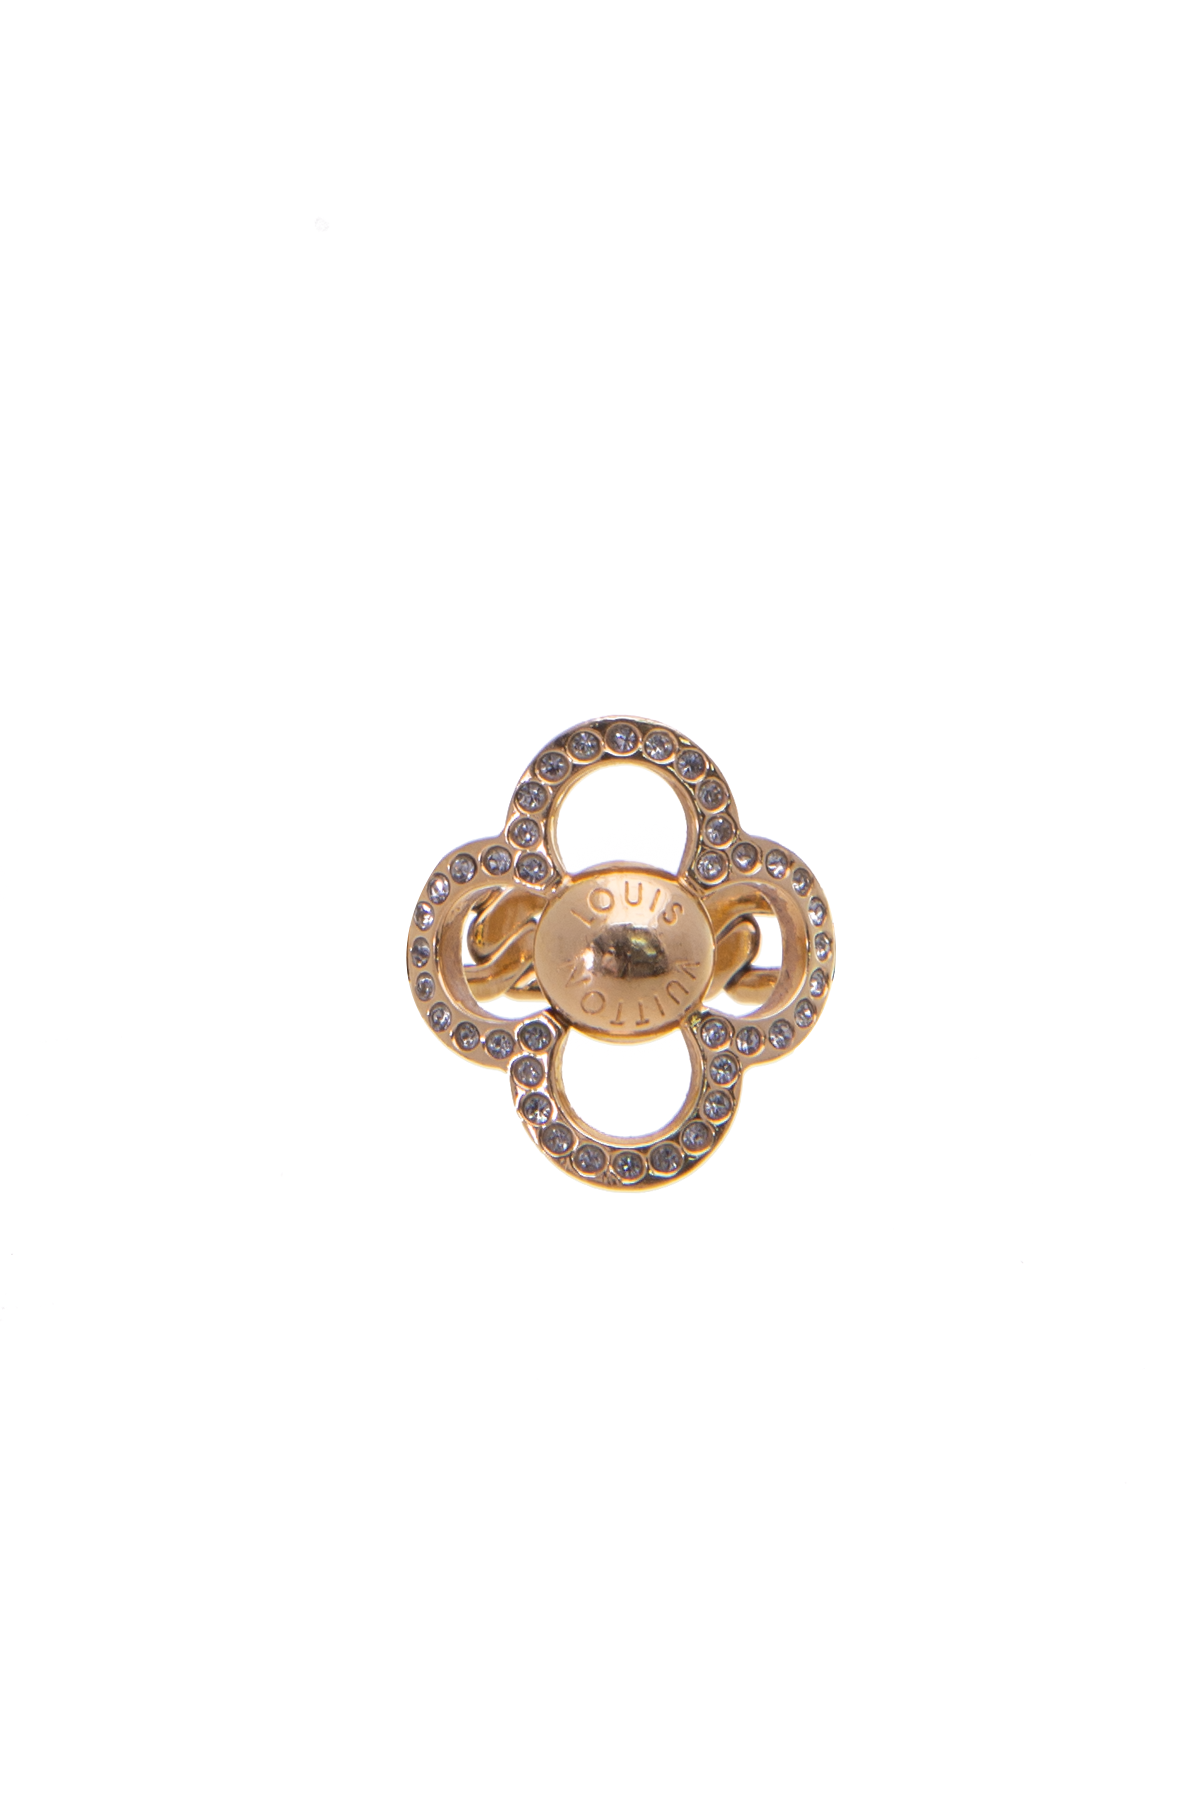 Louis Vuitton Crystal Flower Power Ring - Size 6.25